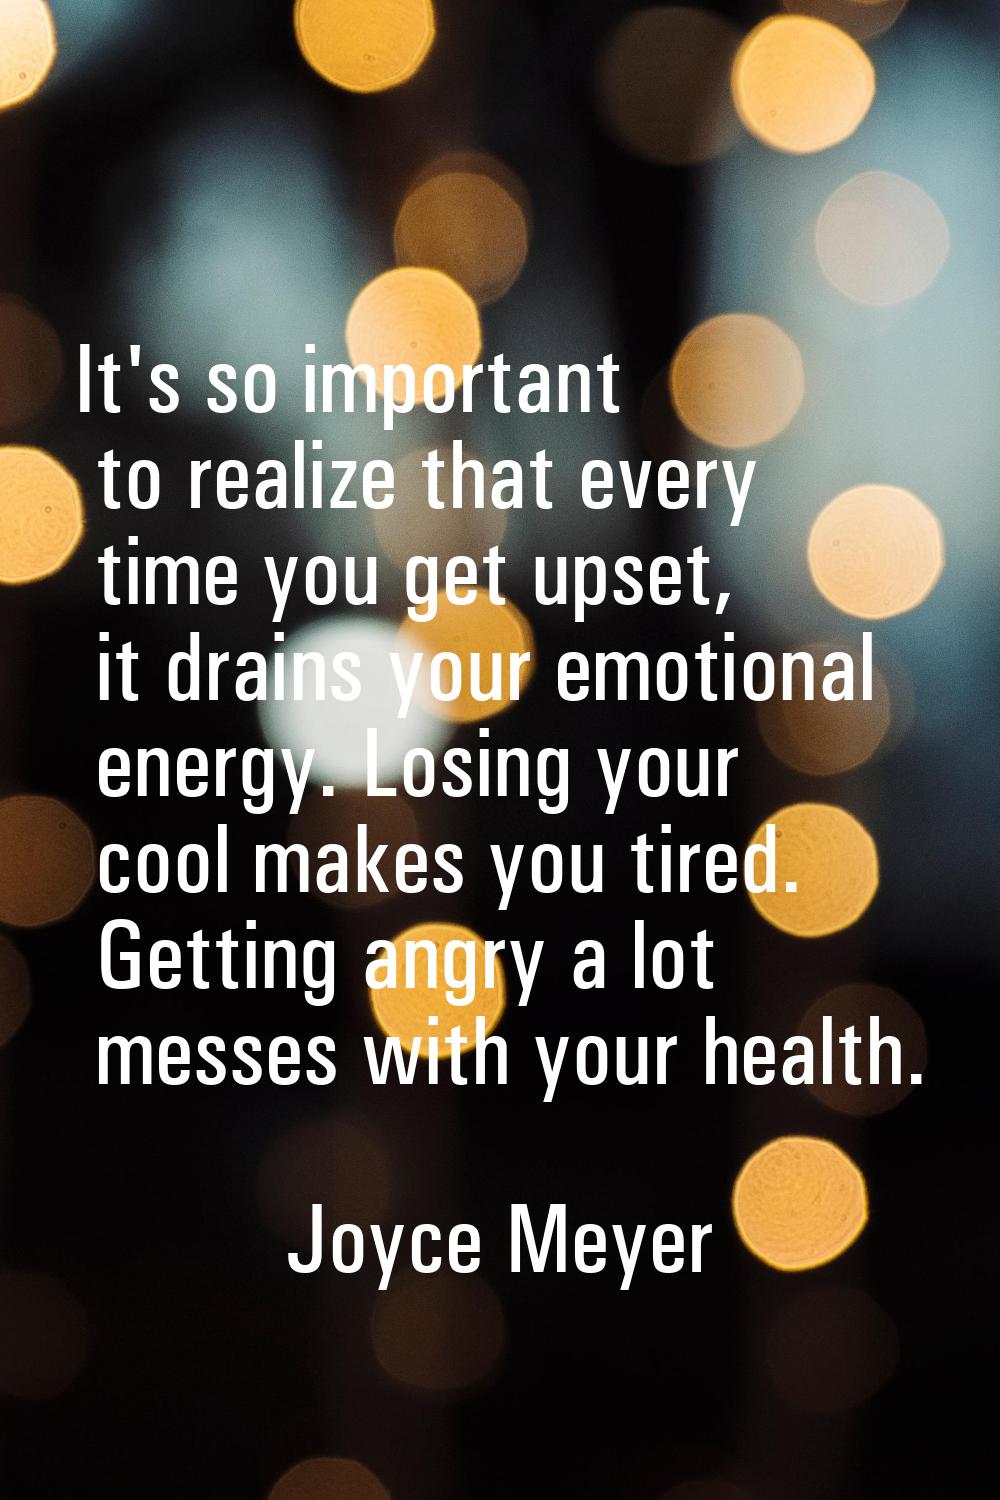 It's so important to realize that every time you get upset, it drains your emotional energy. Losing